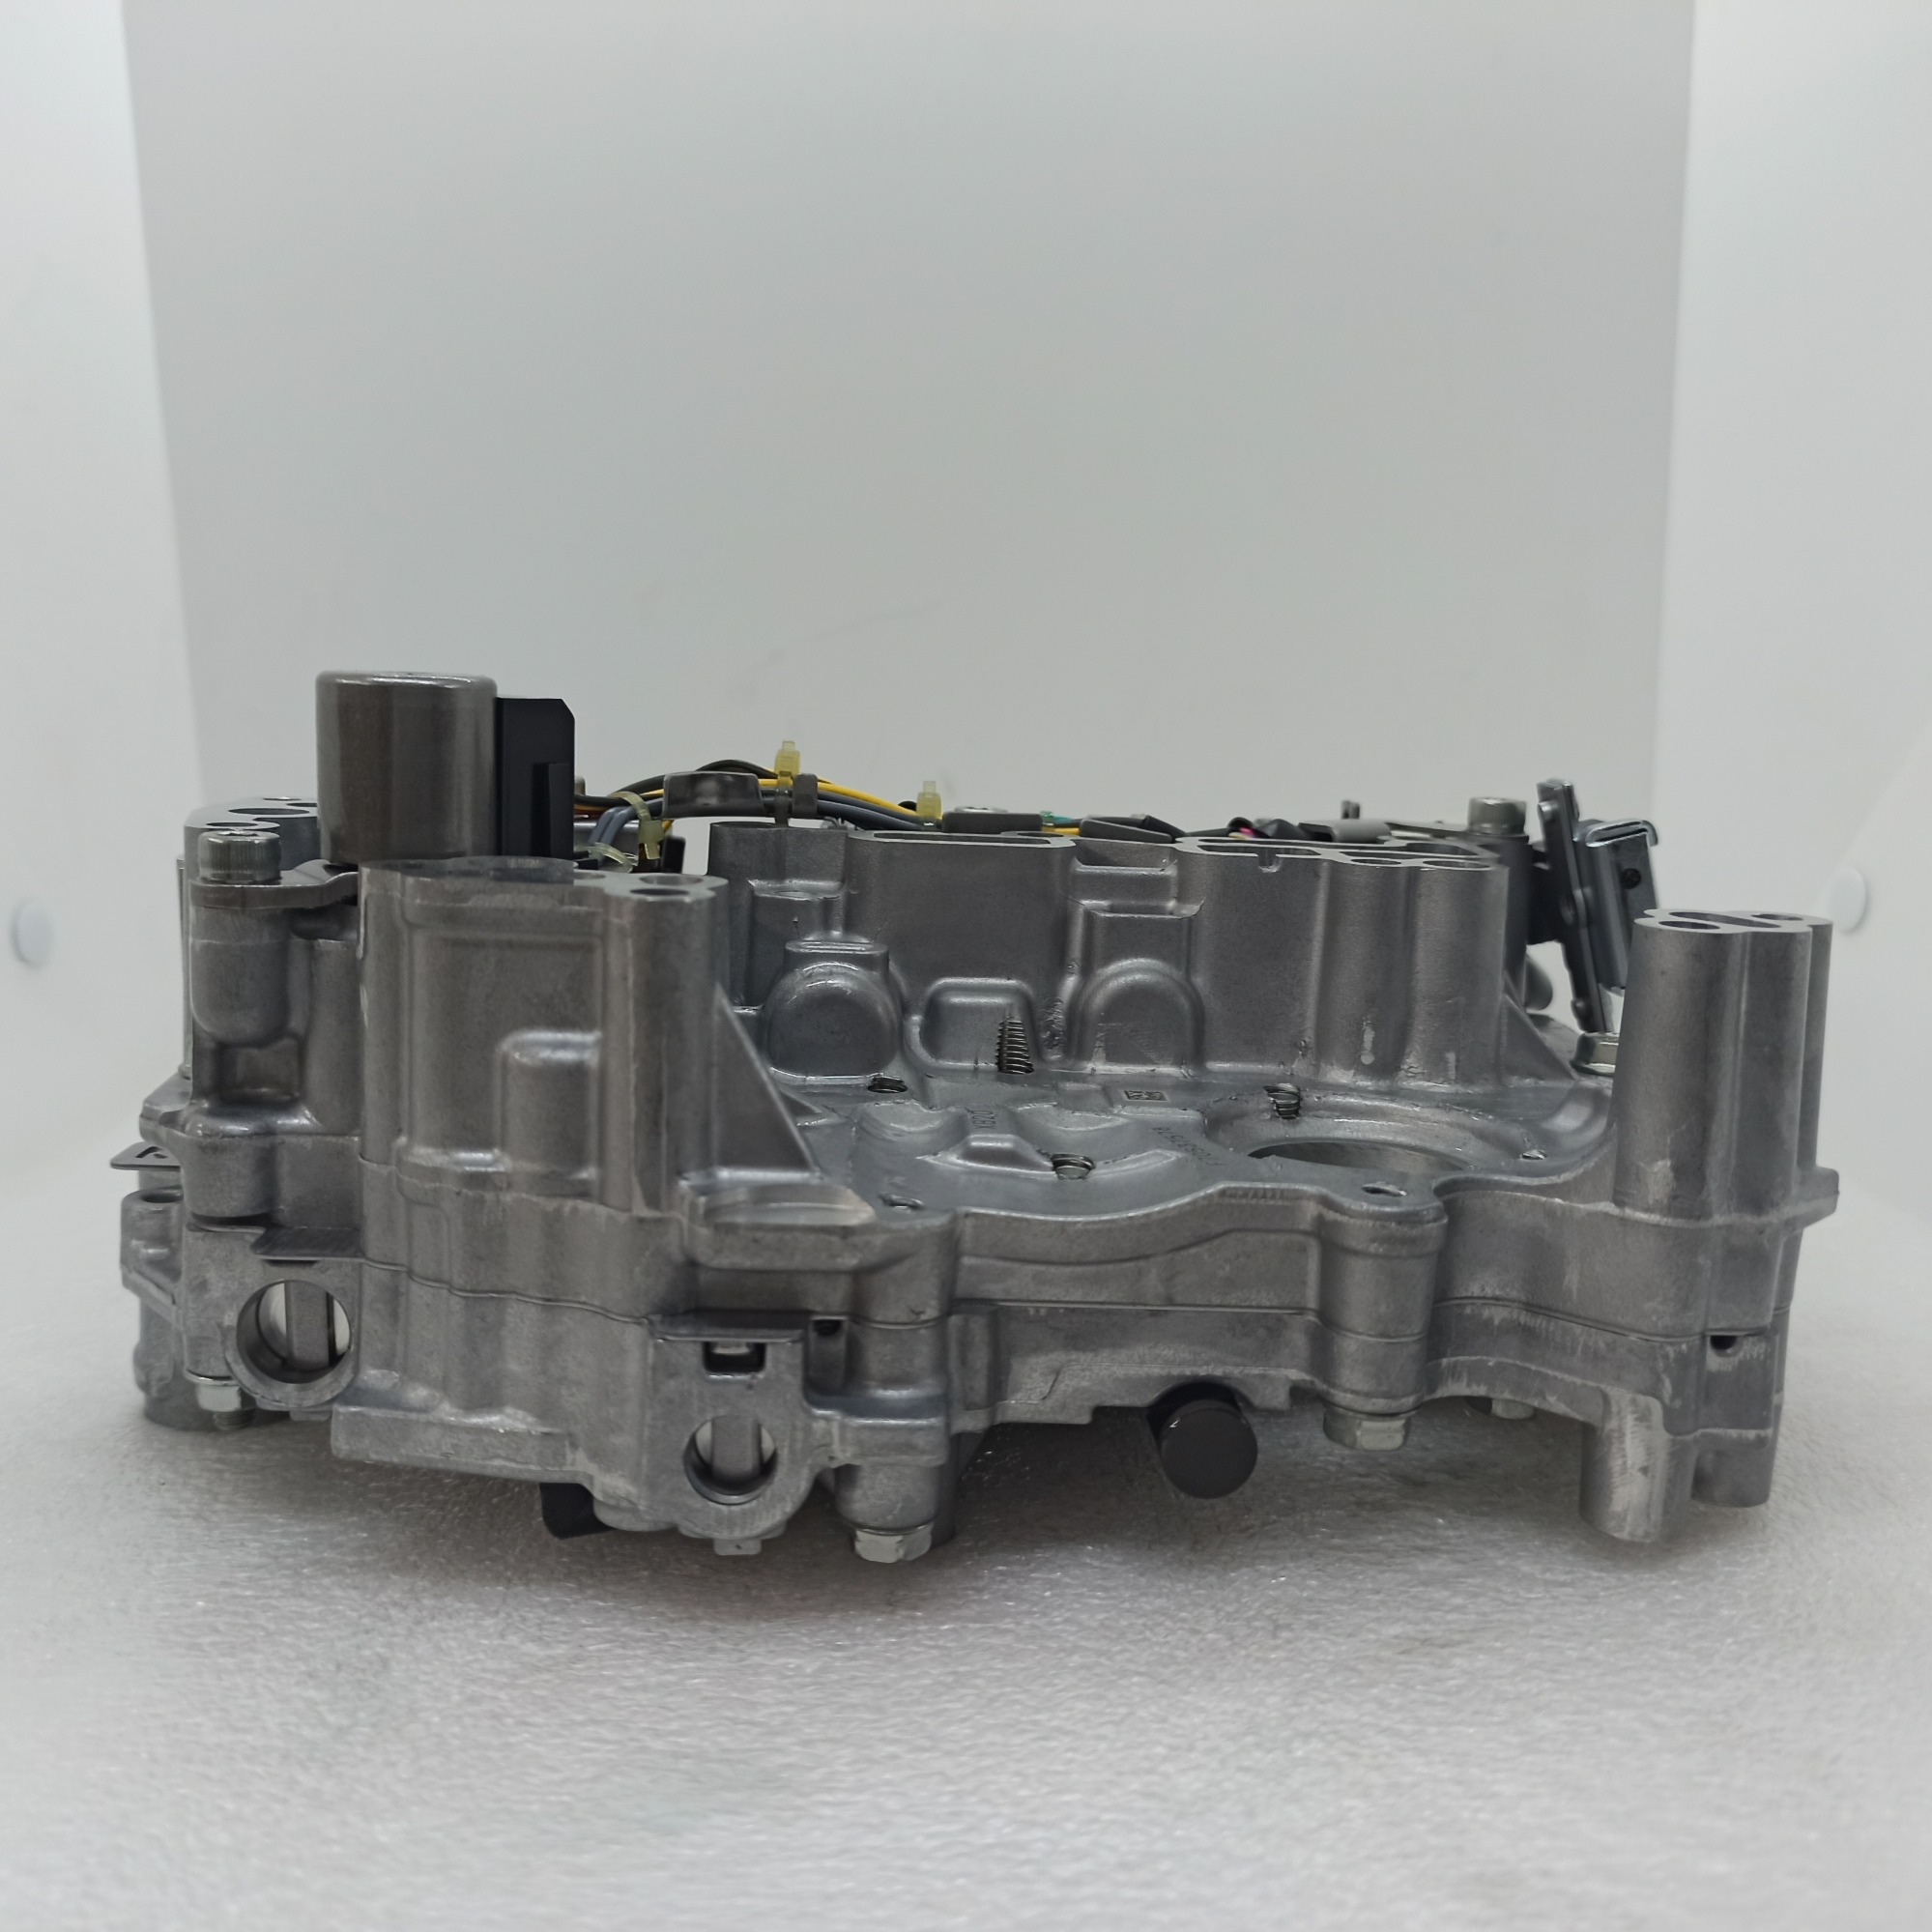 FROM NEW TRANS RE0F11A JATCO JF015E CVT JF015E Transmission Valve Body for Nissa n JF015E-0048-FN